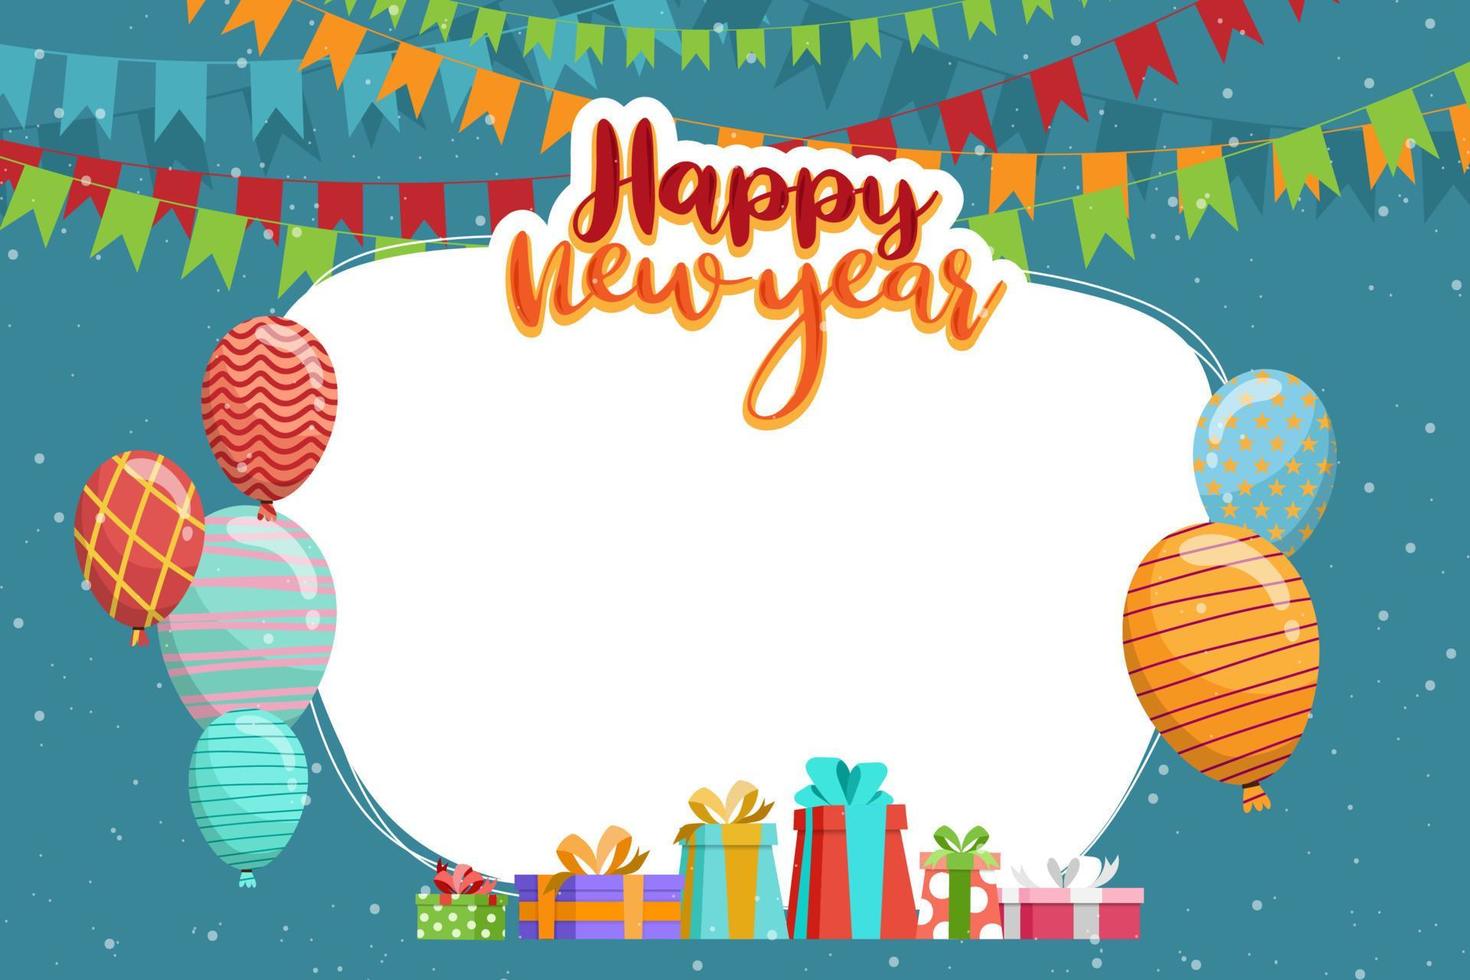 Greeting New year 2022 card cartoon with lettering vector illustration